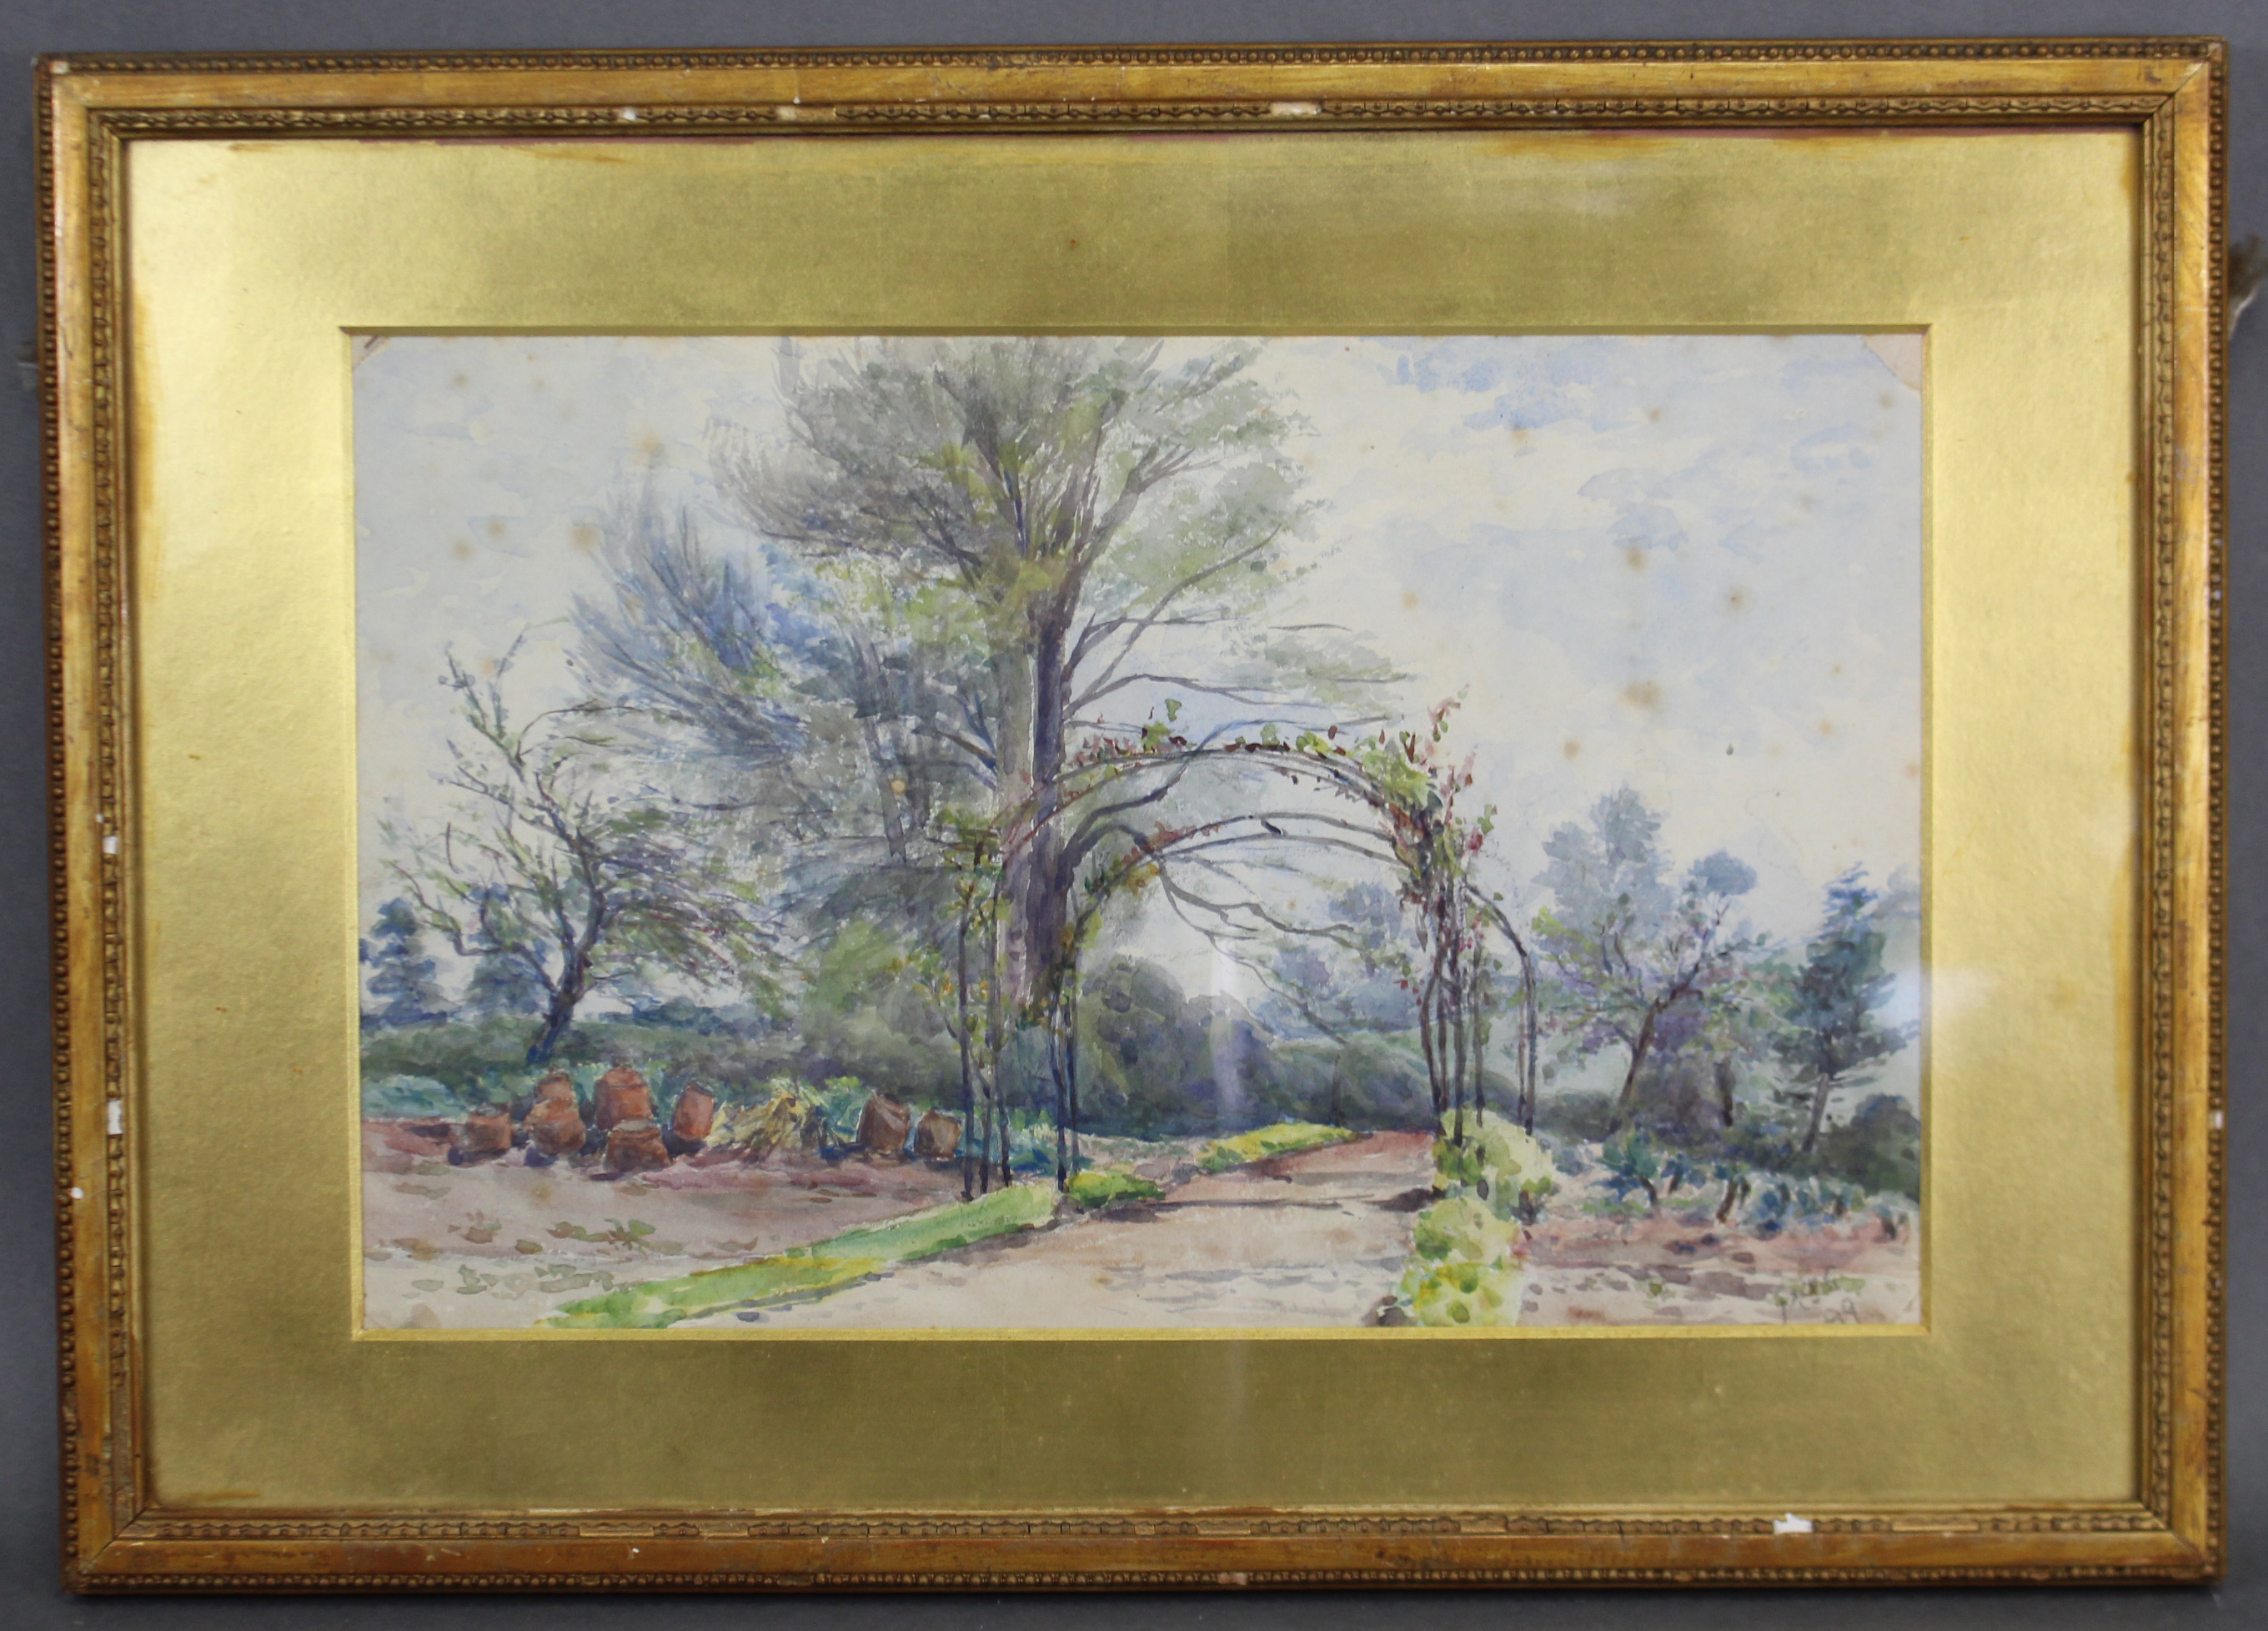 ENGLISH SCHOOL, 19th century. A rural landscape with willow arches, signed & dated “M.J.S. ‘99”